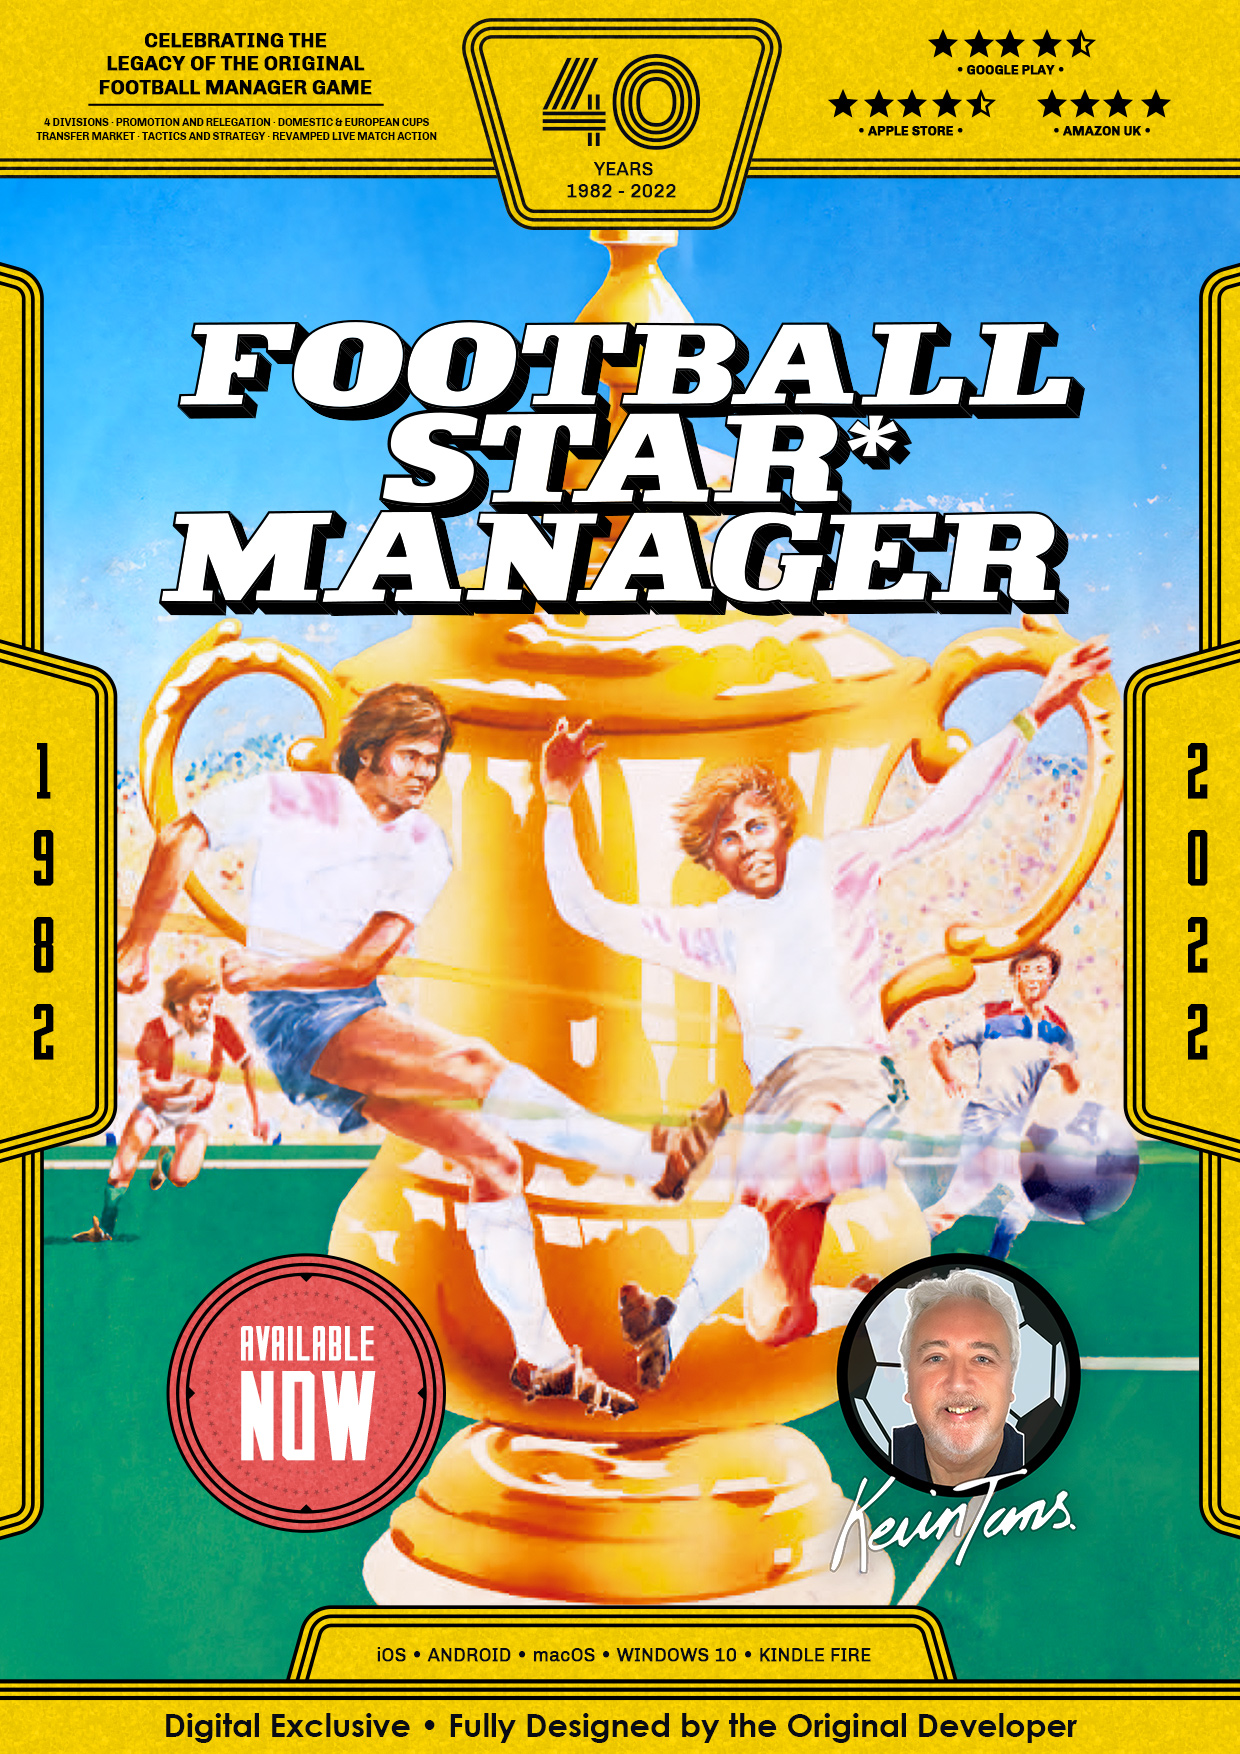 Kevin Toms Football Star manager 40th anniversary pack shot